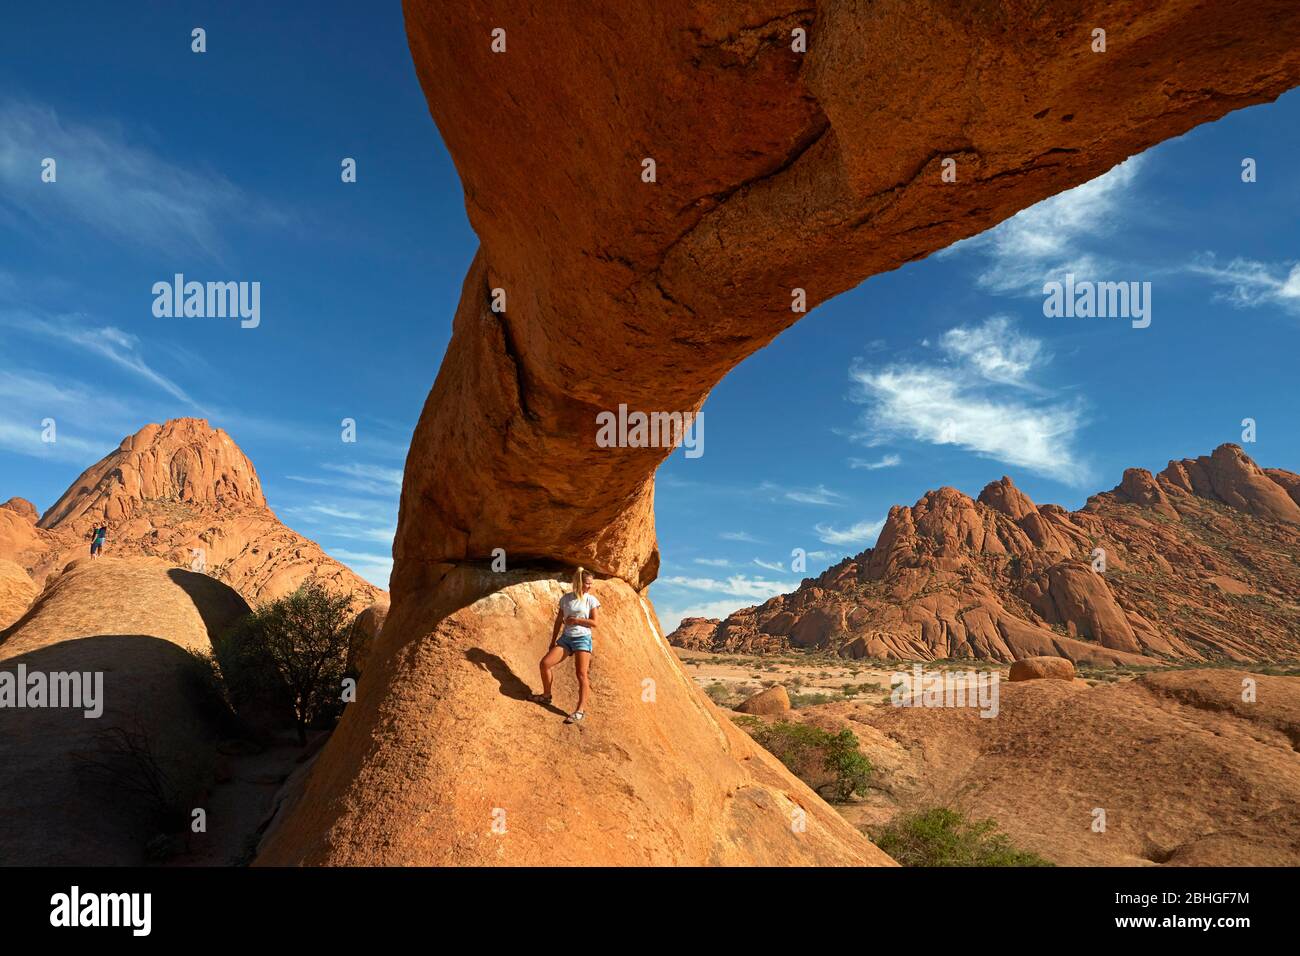 Girl under natural rock arch at Spitzkoppe (left), and Pondok Mountains in distance (right), Namibia, Africa Stock Photo